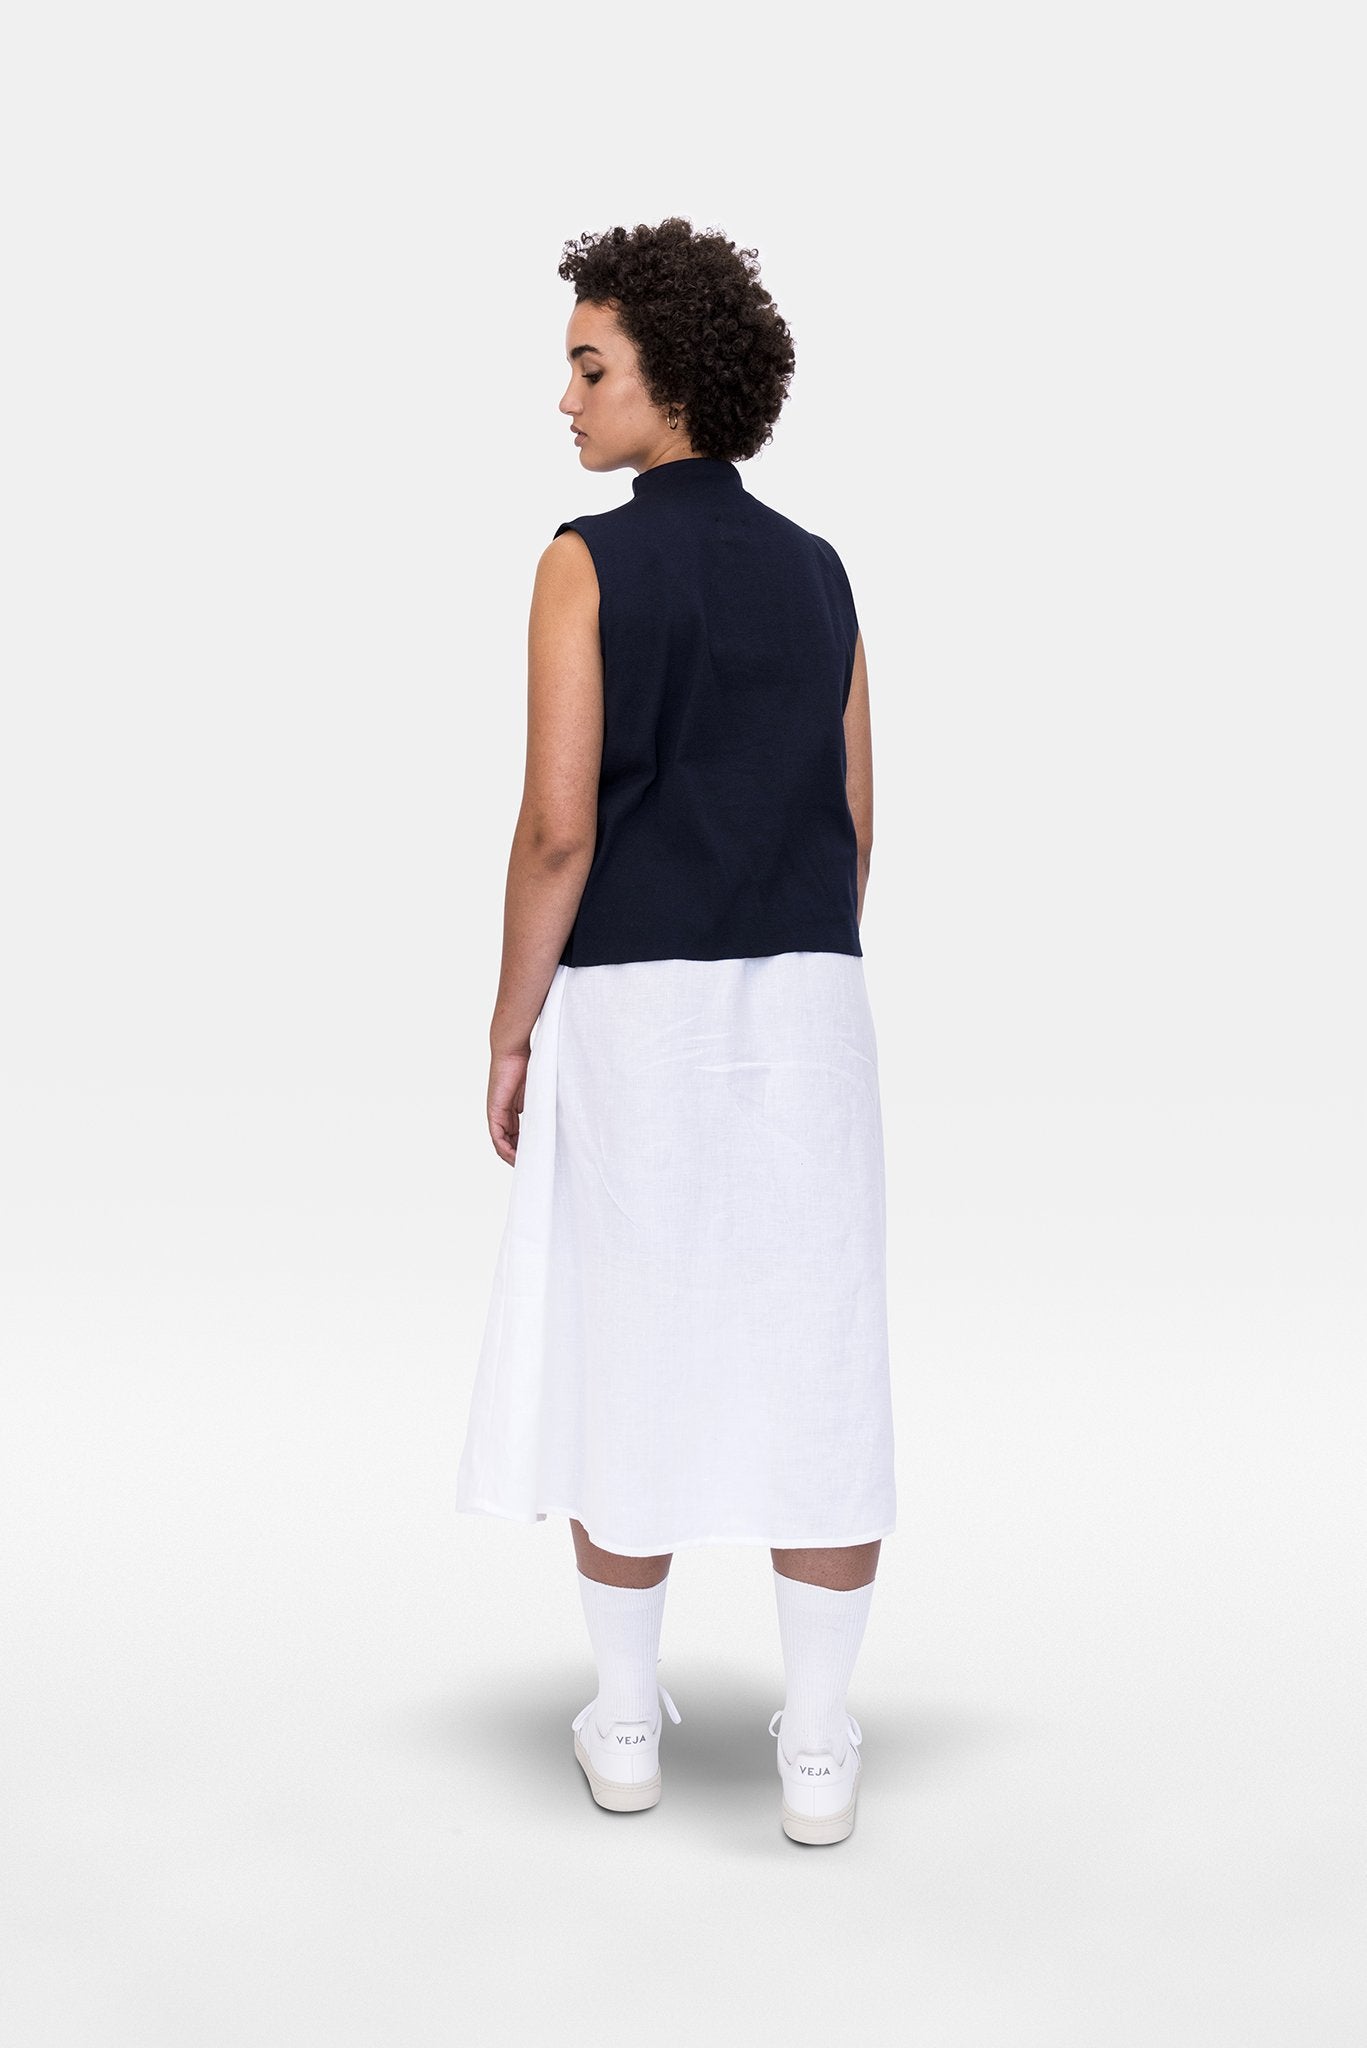 A.BCH A.14 Navy Sleeveless Skivvy in Organic Cotton